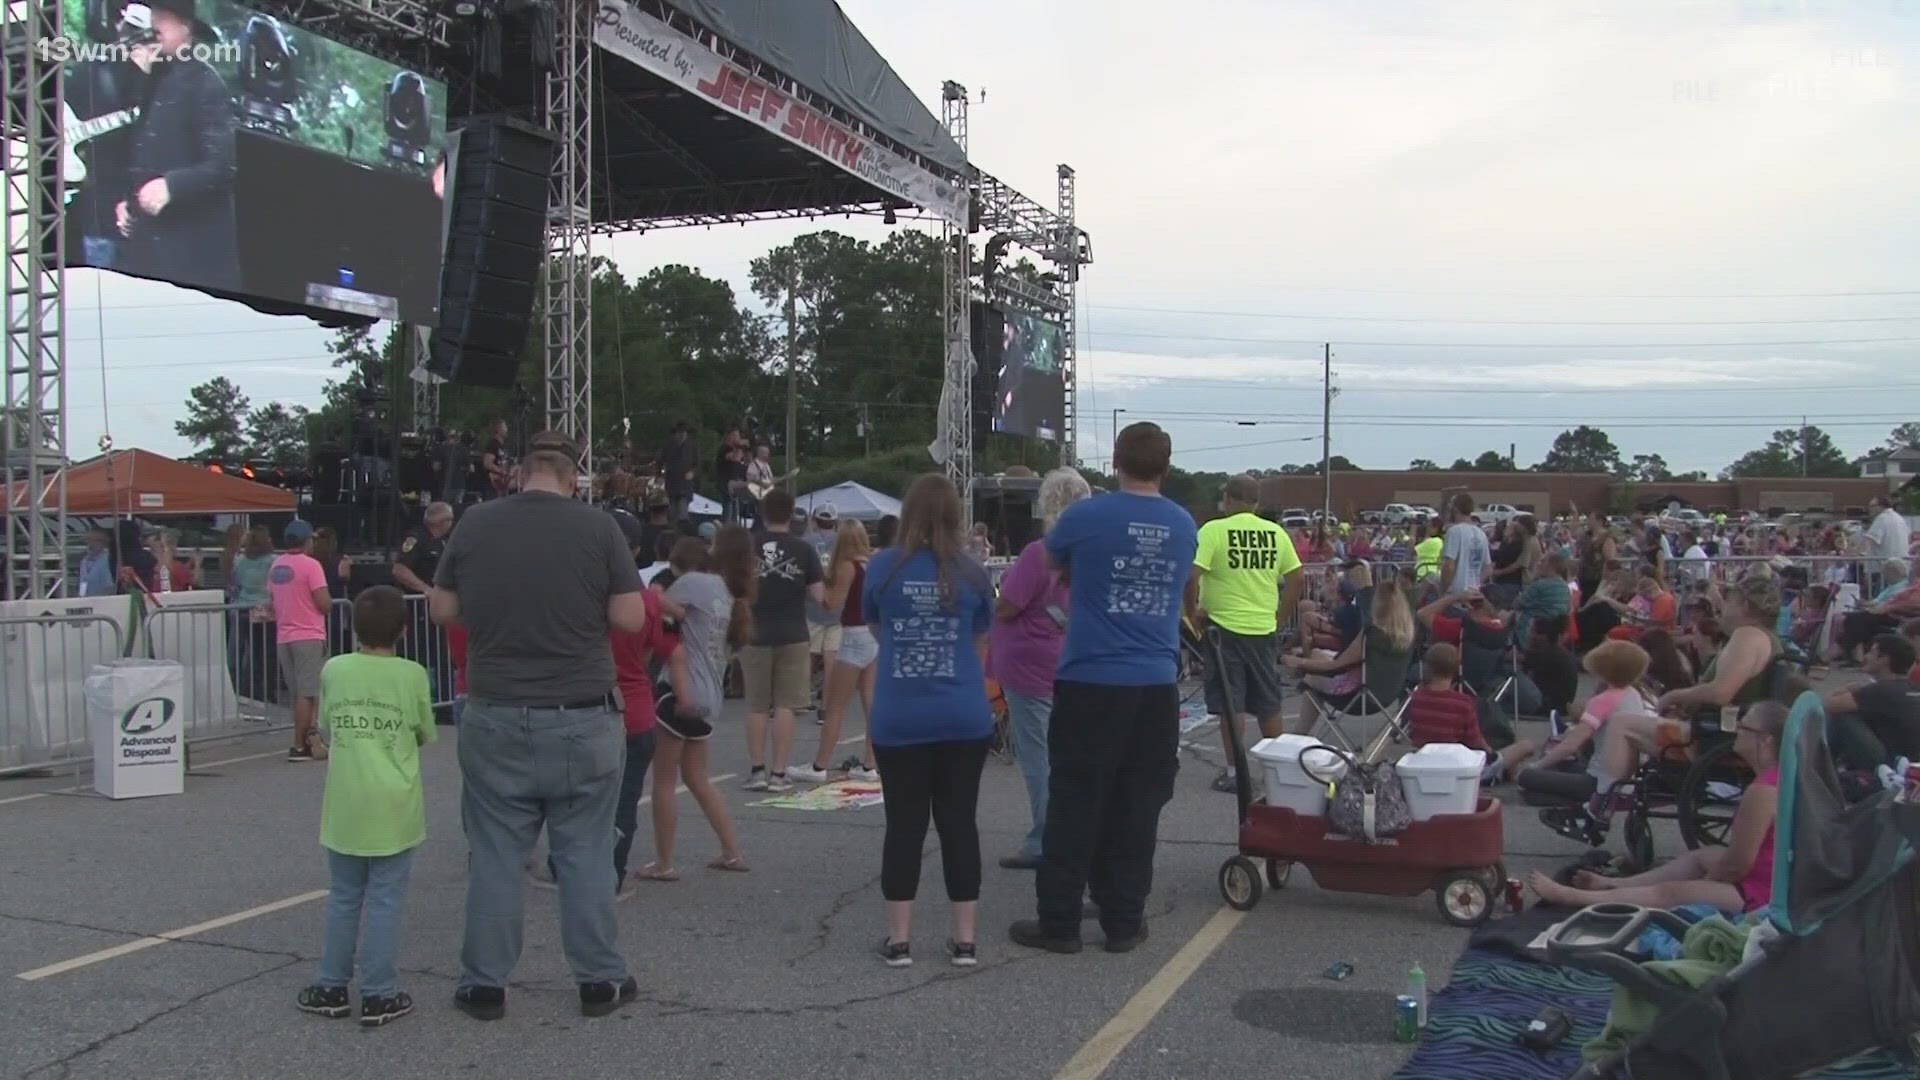 The city announced the line-up for the annual free concert scheduled for July 1.